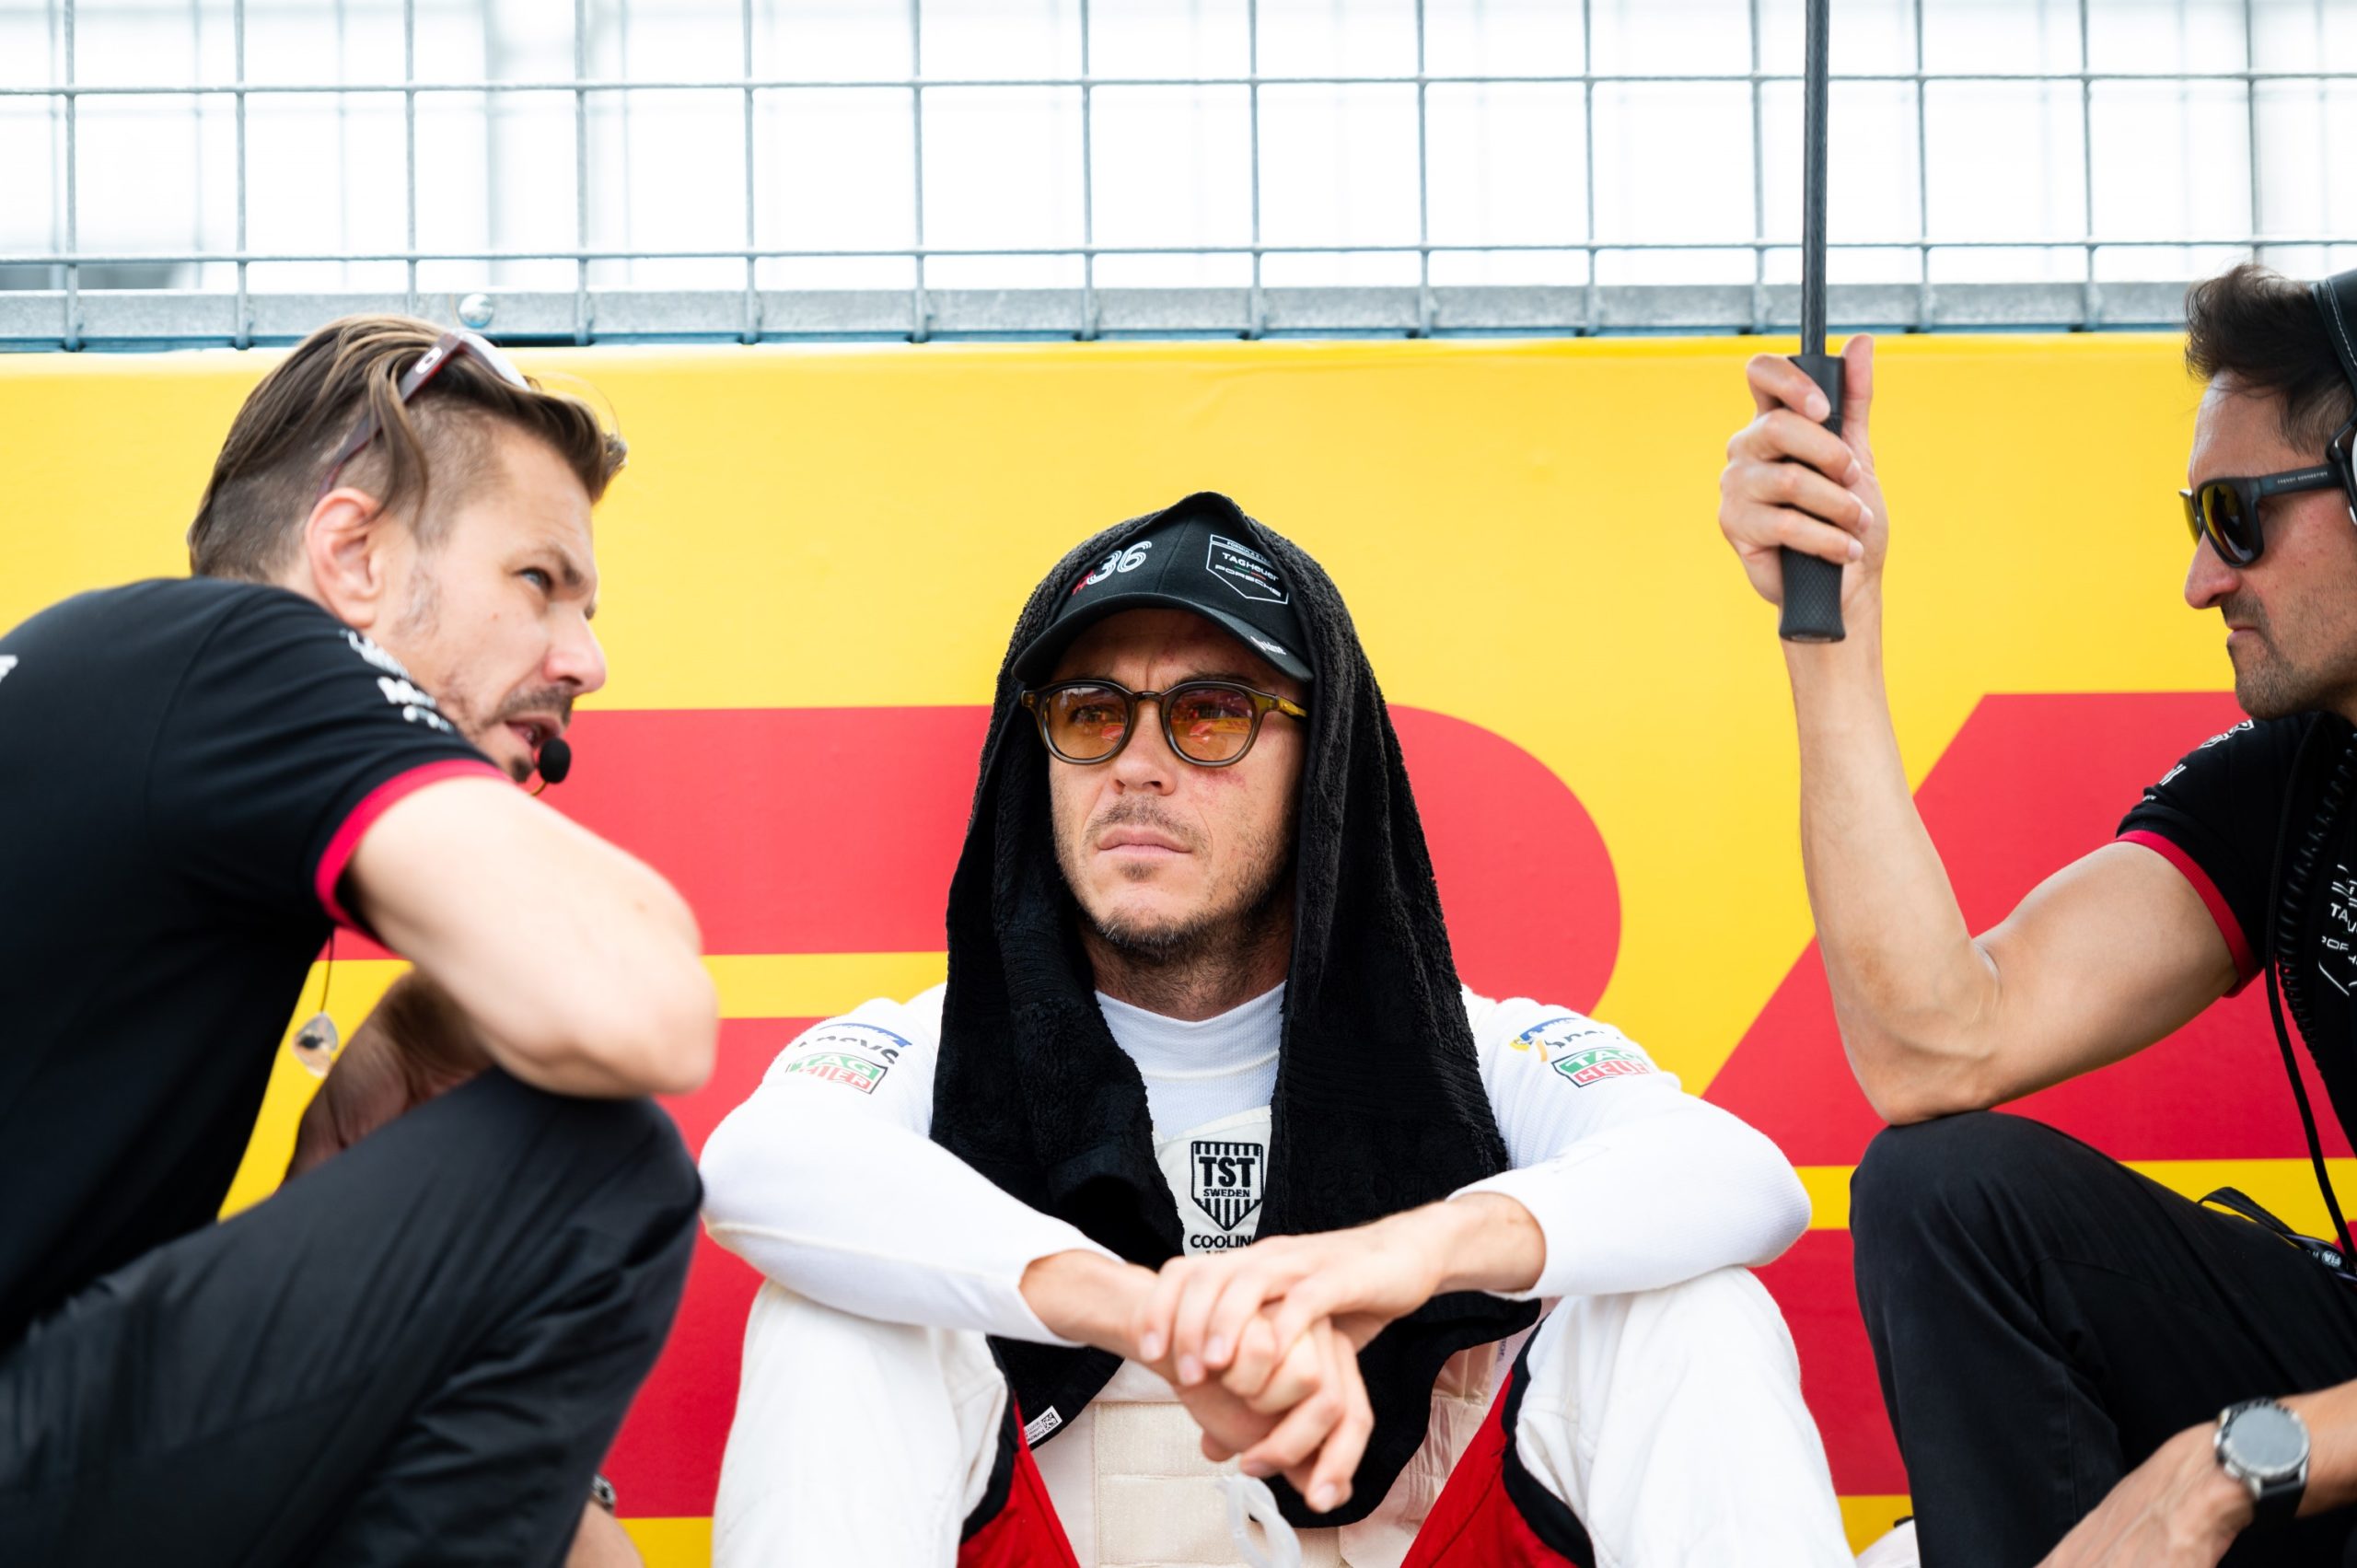 sceptic to stalwart: an impactful yet incomplete formula e journey